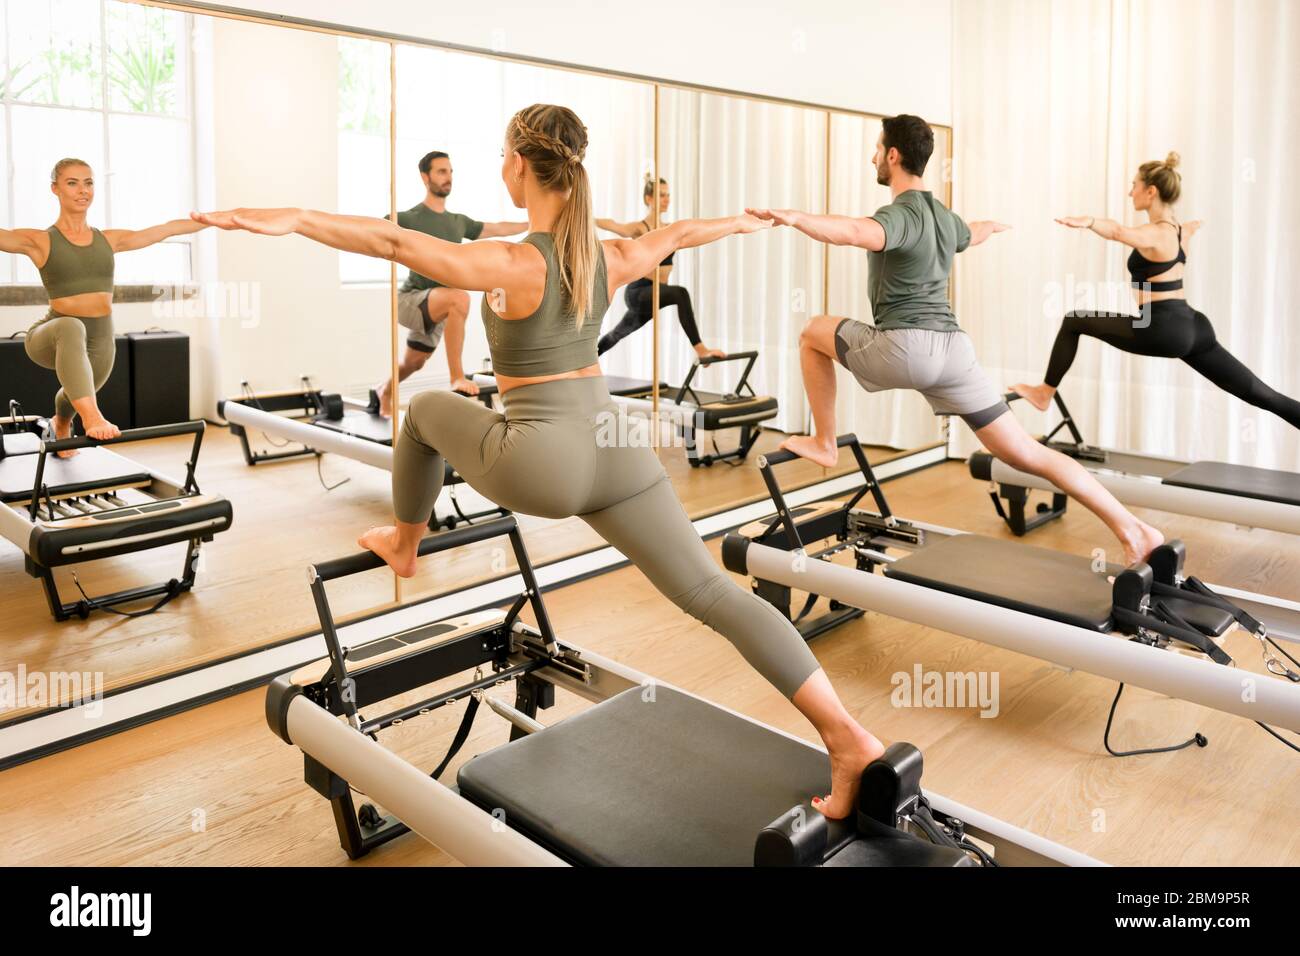 https://c8.alamy.com/comp/2BM9P5R/pilates-class-of-athletes-doing-a-standing-lunge-exercise-on-reformer-beds-reflected-in-a-wall-mirror-in-a-high-key-gym-in-a-health-and-fitness-concep-2BM9P5R.jpg